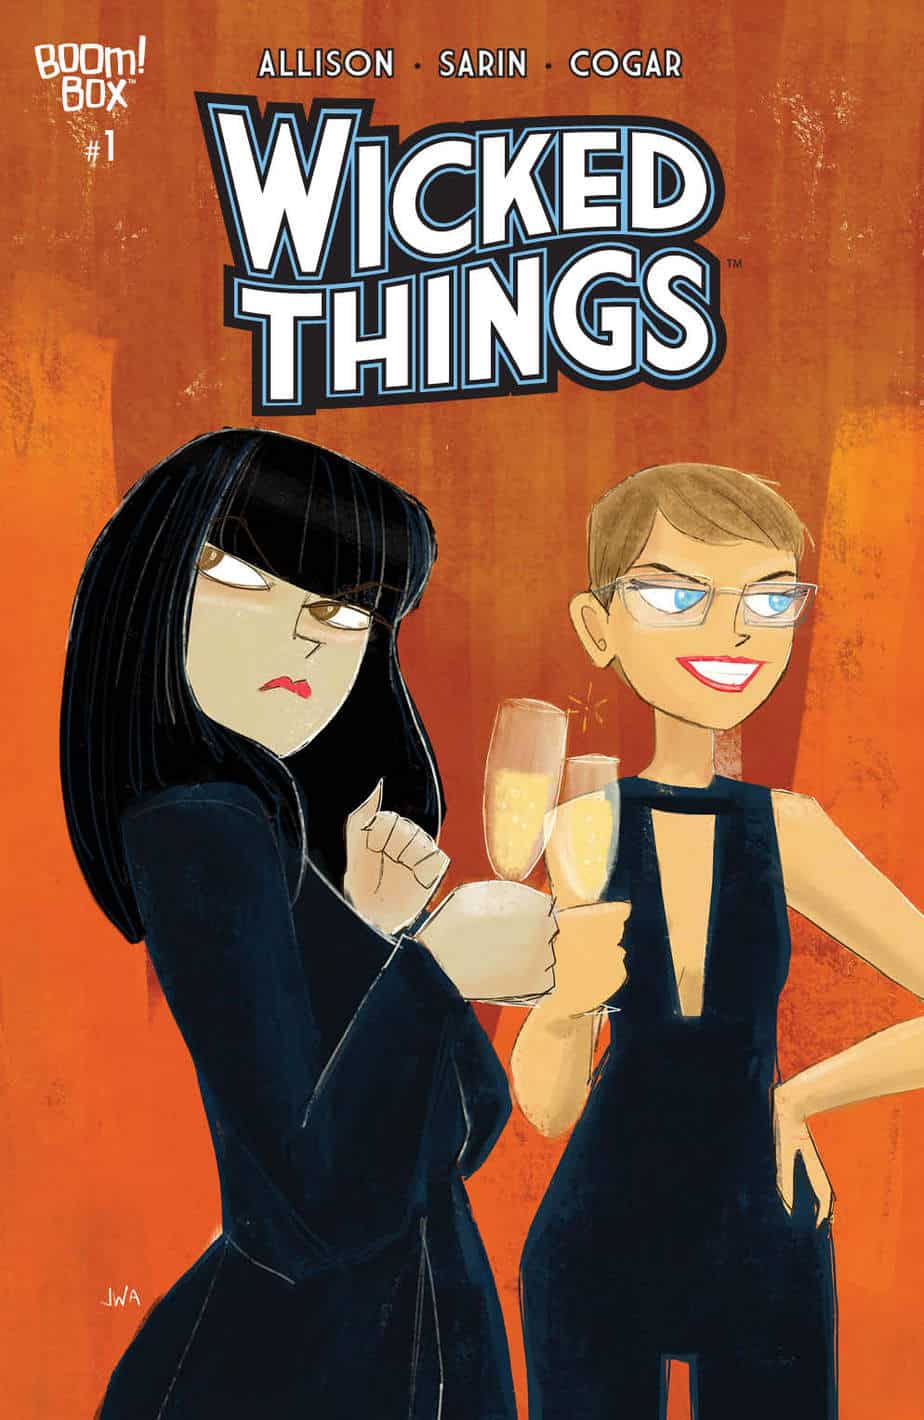 WICKED THINGS #1 - Variant Cover